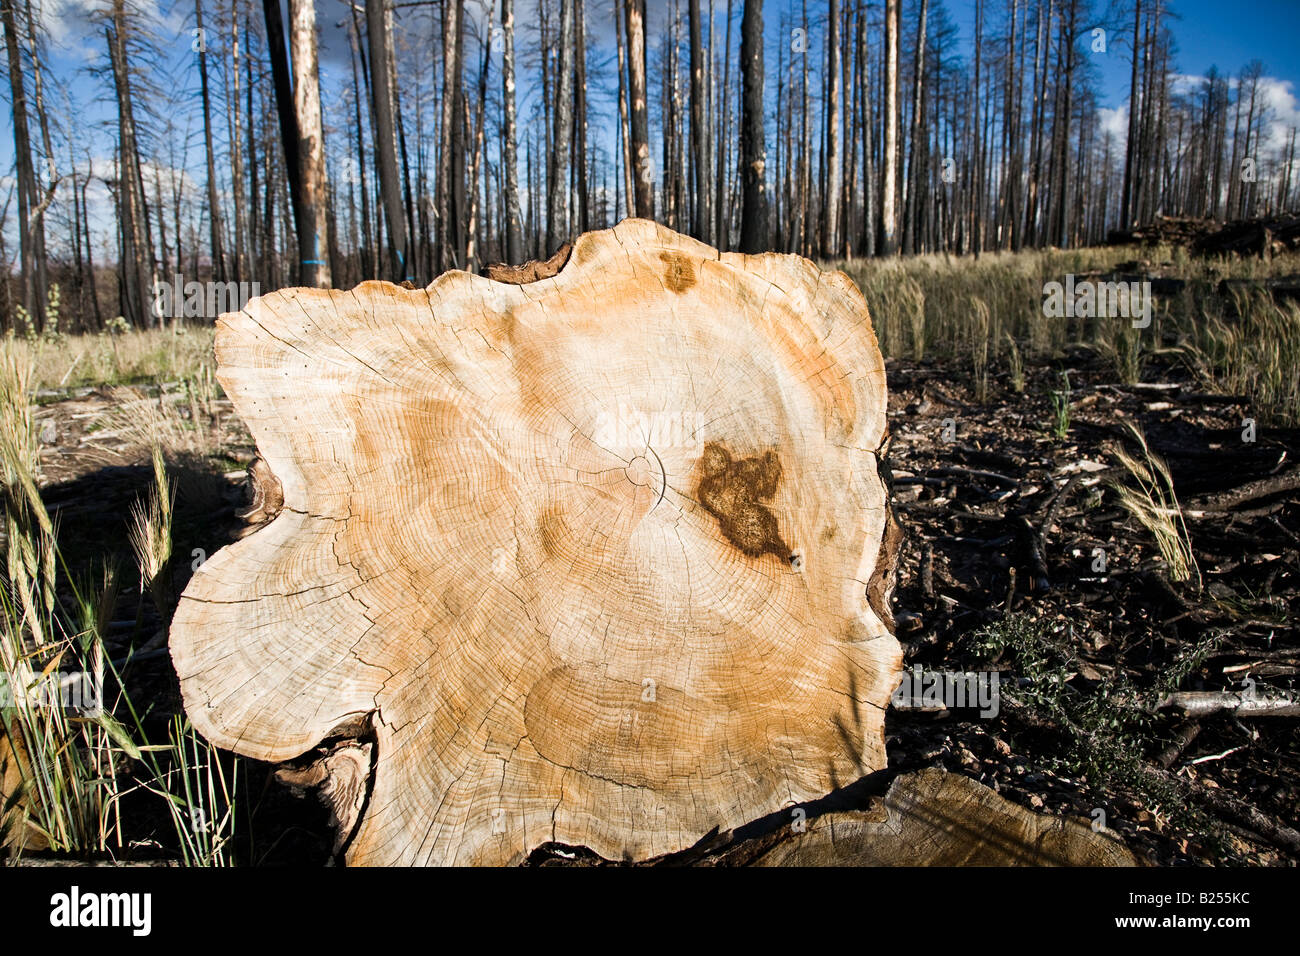 Annual rings - Cutted tree, Kaibab National Forest in Arizona, USA Stock Photo